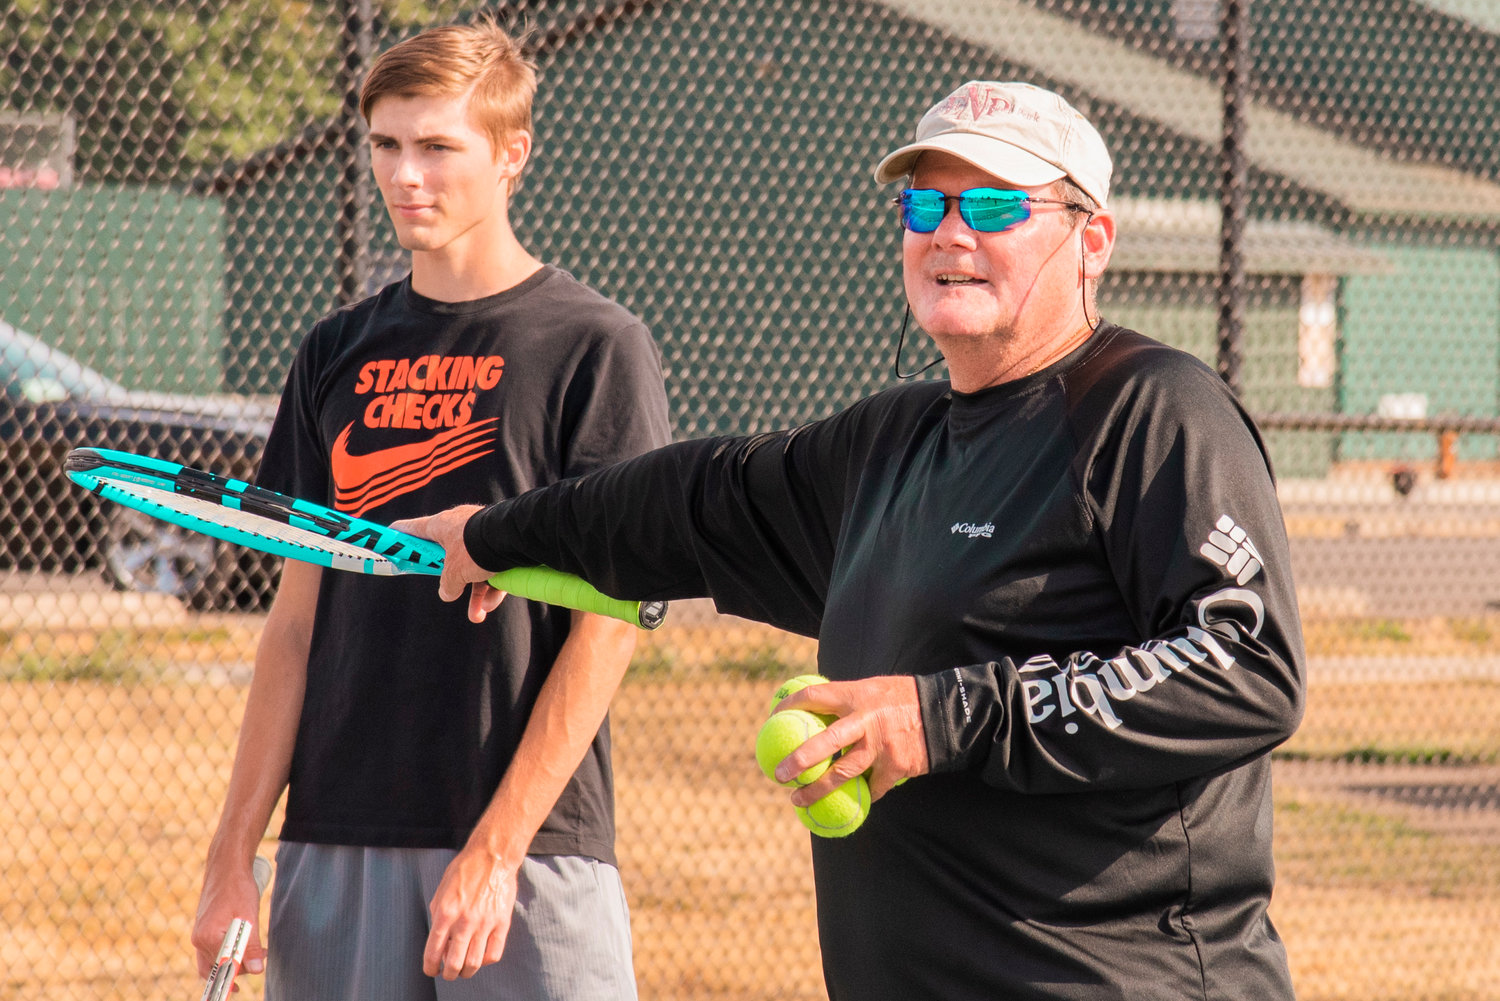 Centralia Tennis Coach Scott Snyder points towards Landon Kaut while talking to players during practice near Tiger Stadium in Centralia on Tuesday.